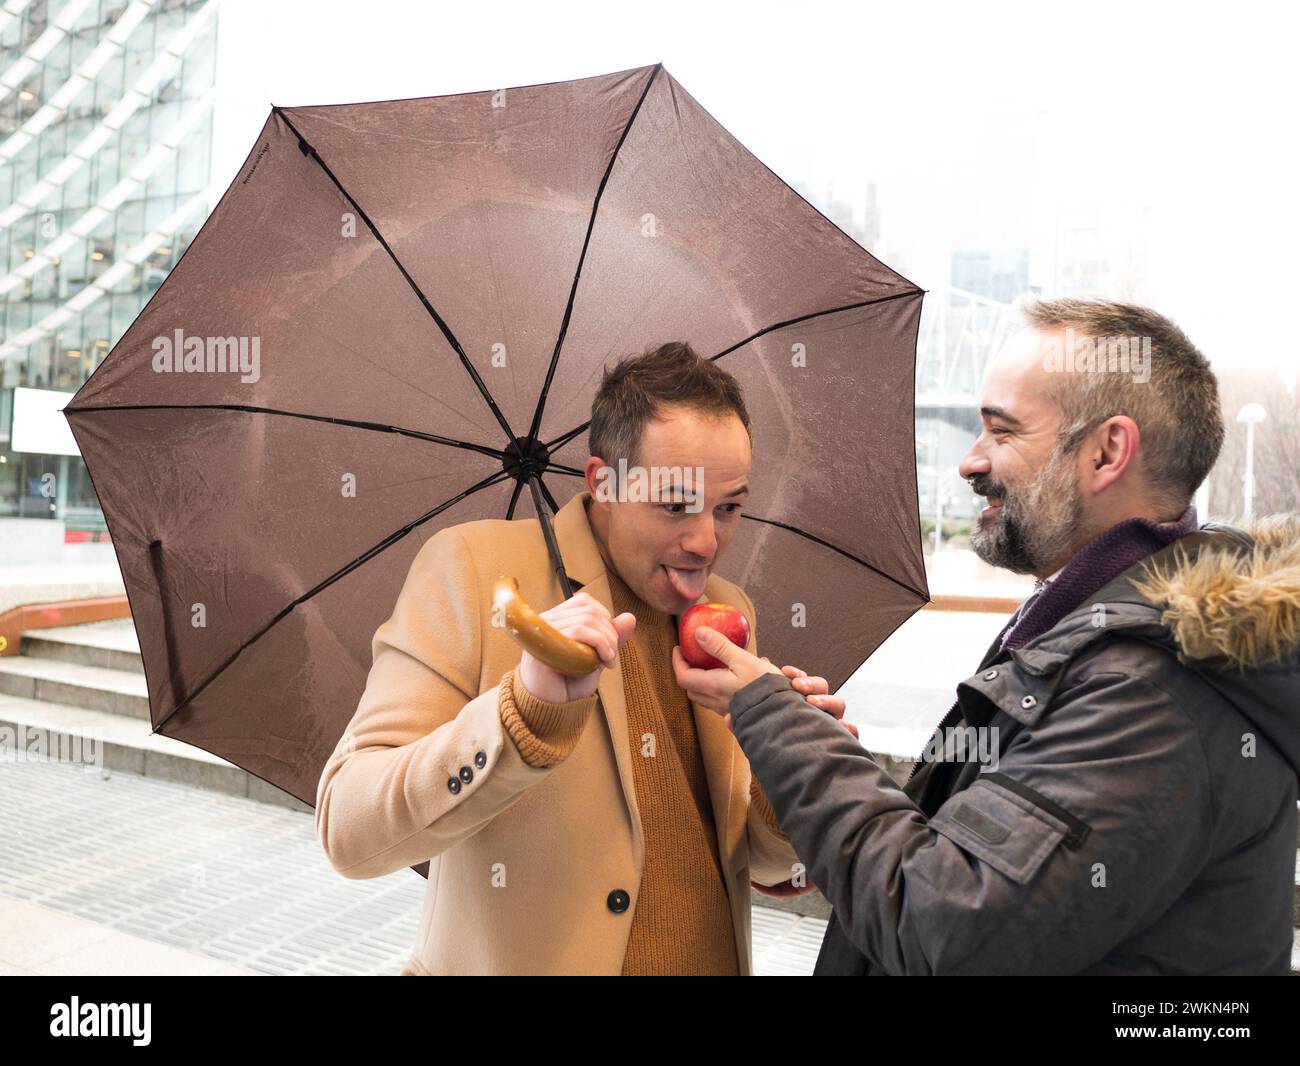 An executive offers a red apple to another who sucks it under the umbrella on a rainy day Stock Photo